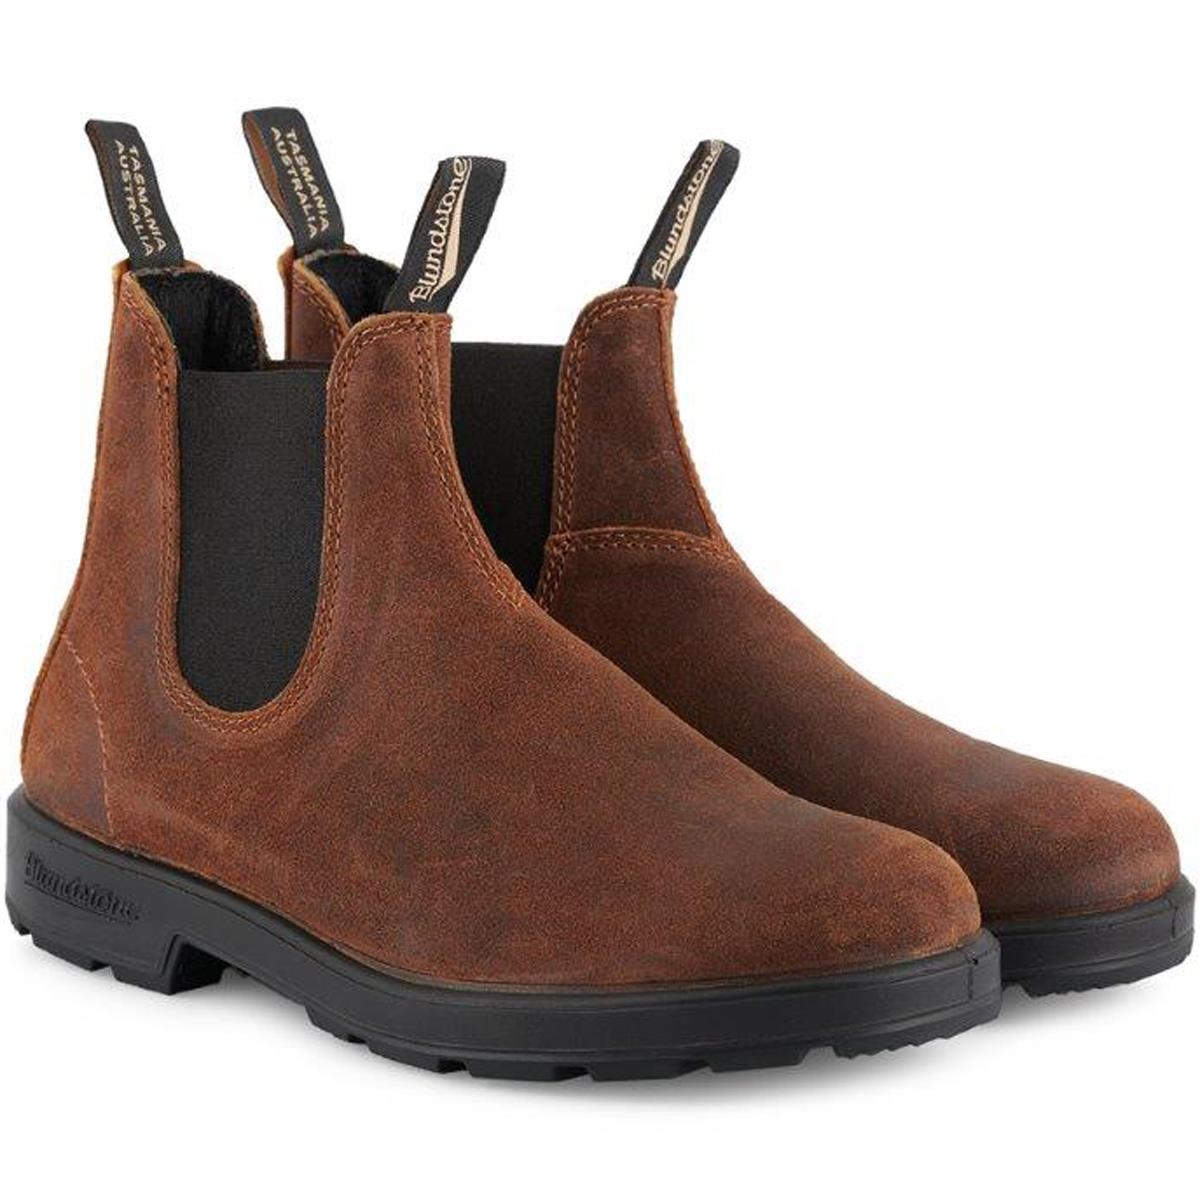 What is the difference between Blundstone Classic and original?